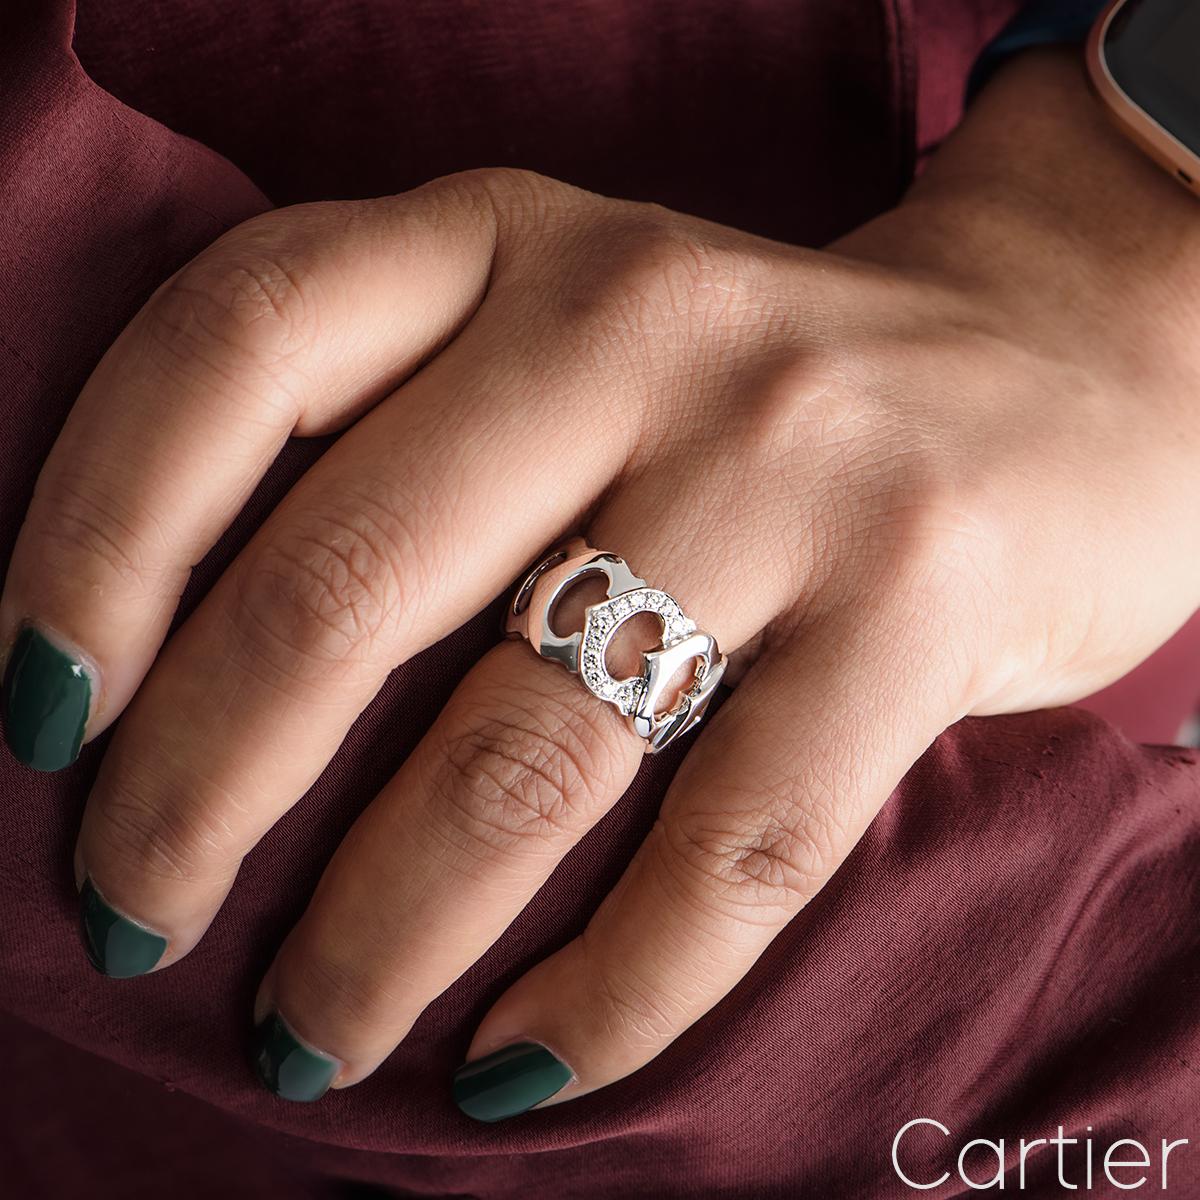 Cartier White Gold Diamond C De Cartier Ring In Excellent Condition For Sale In London, GB